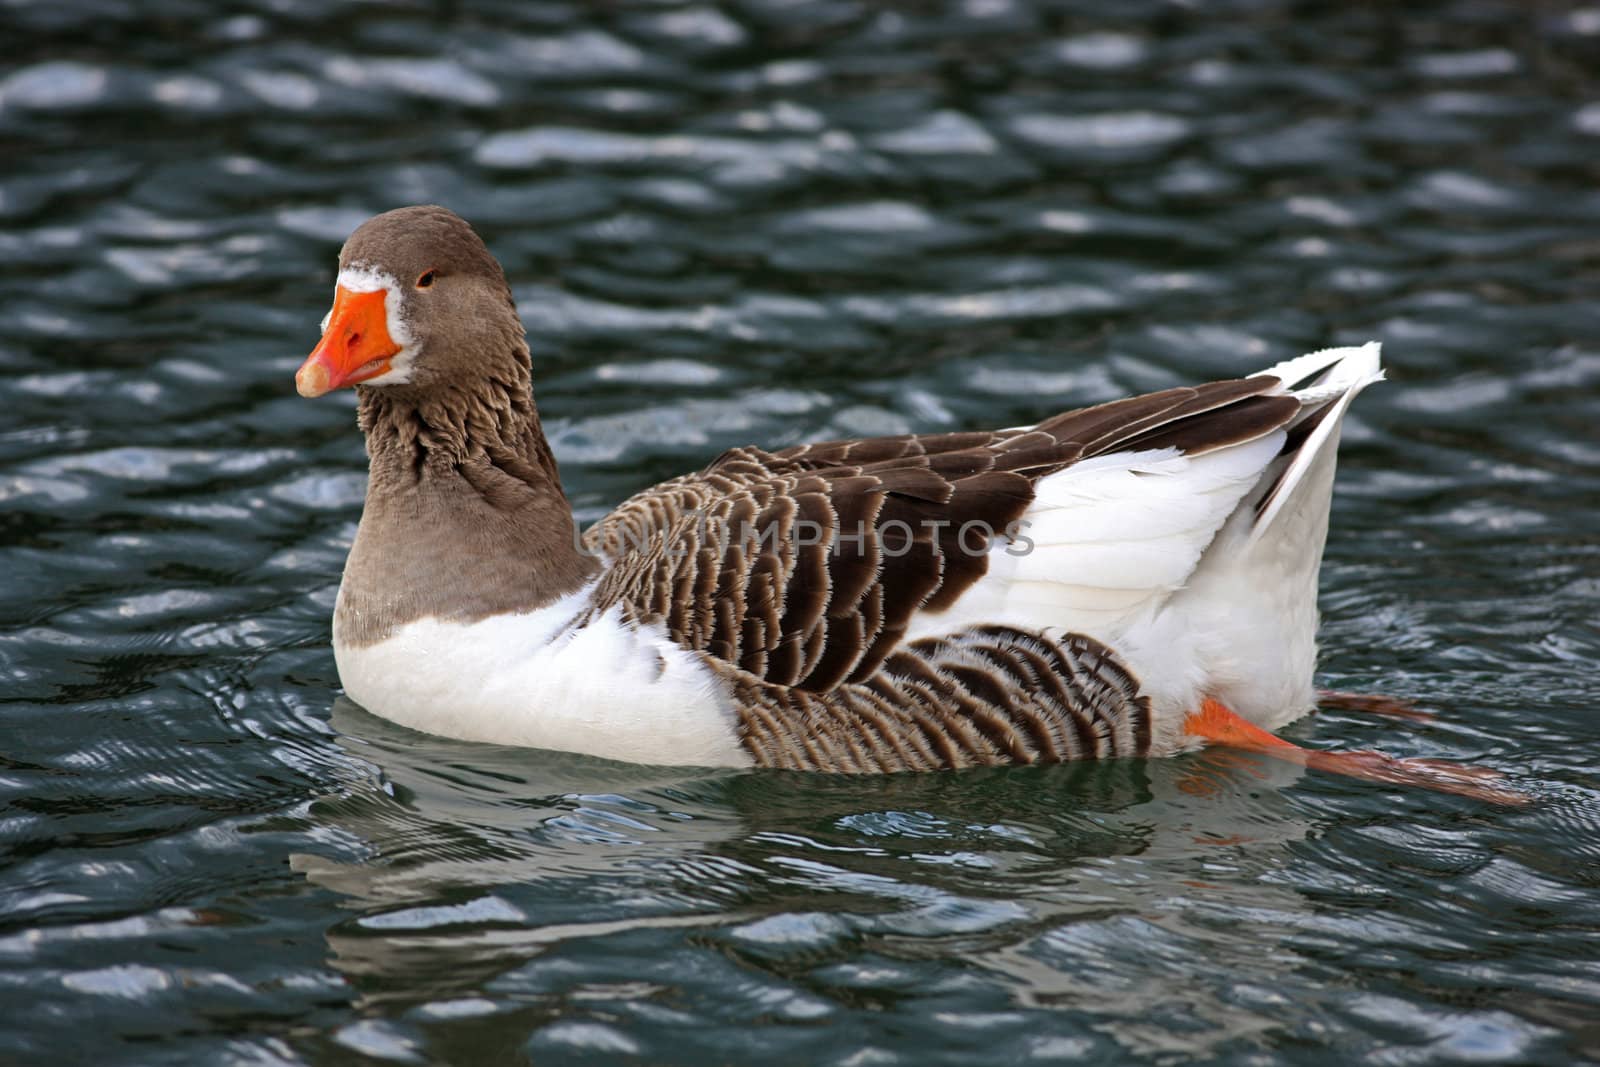 Swimmig Goose by monner